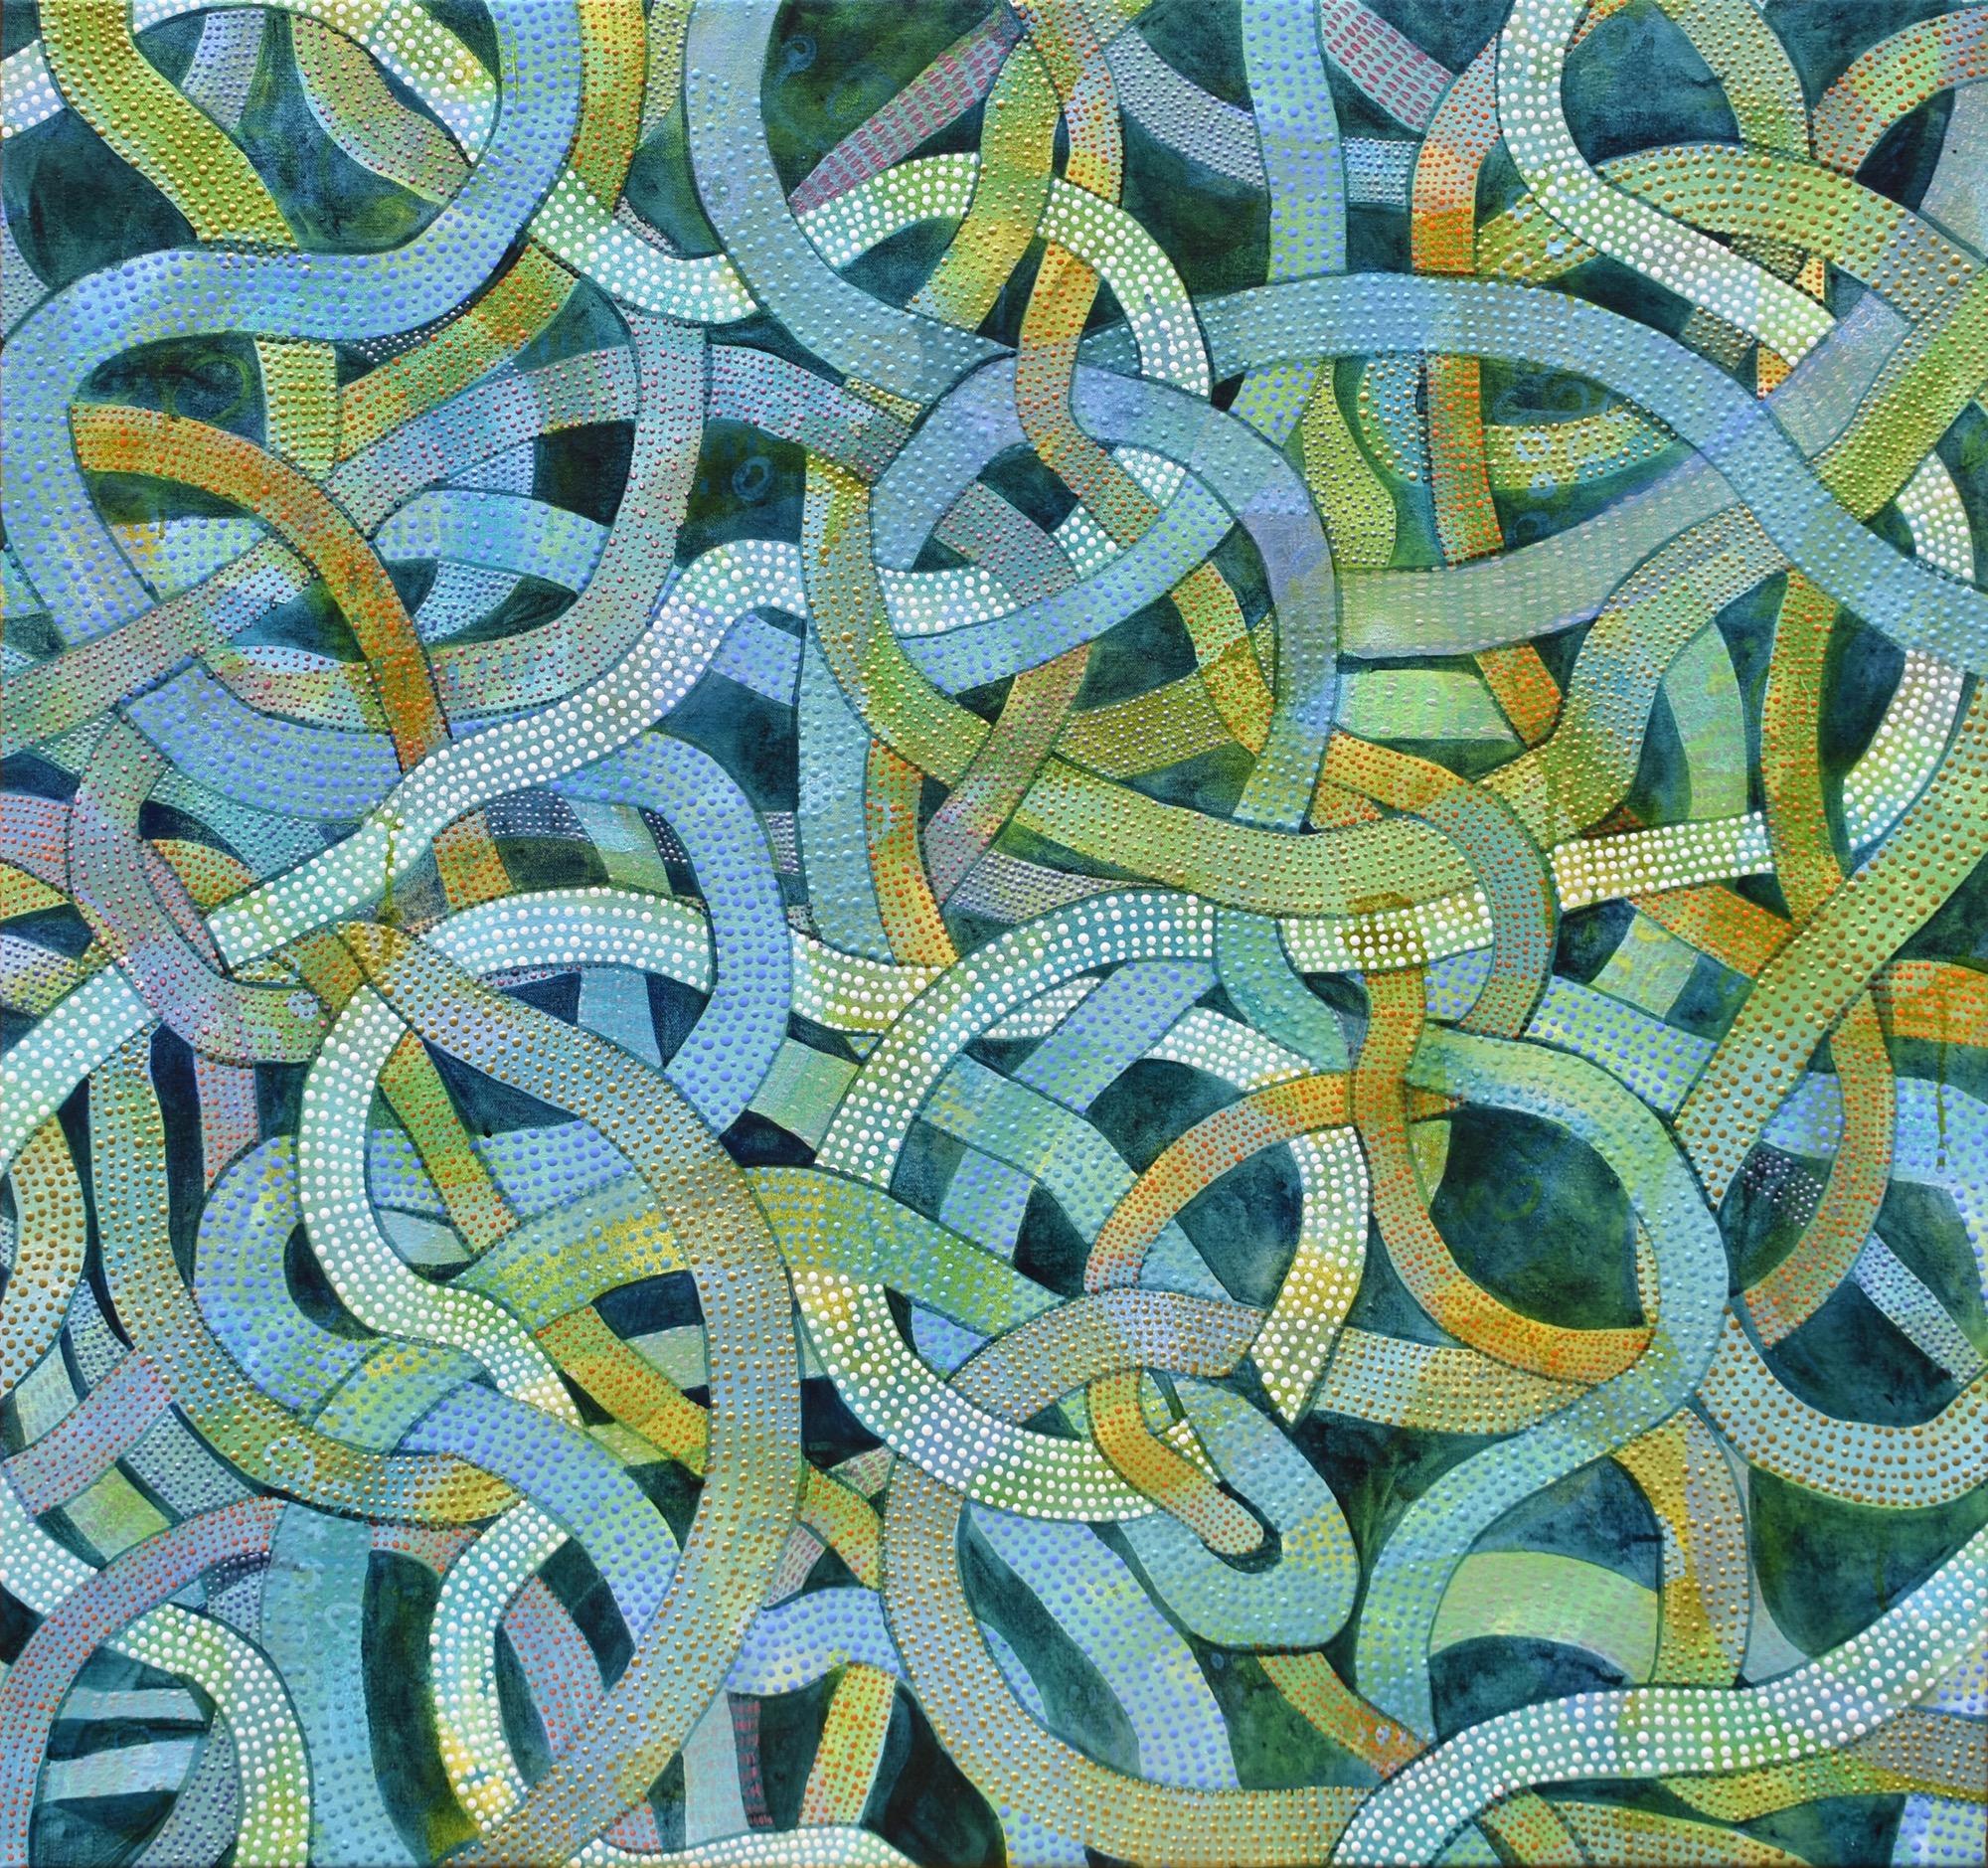 "Tangle 1", abstract, blue, green, yellow, dots, gold, white, acrylic painting - Painting by Denise Driscoll